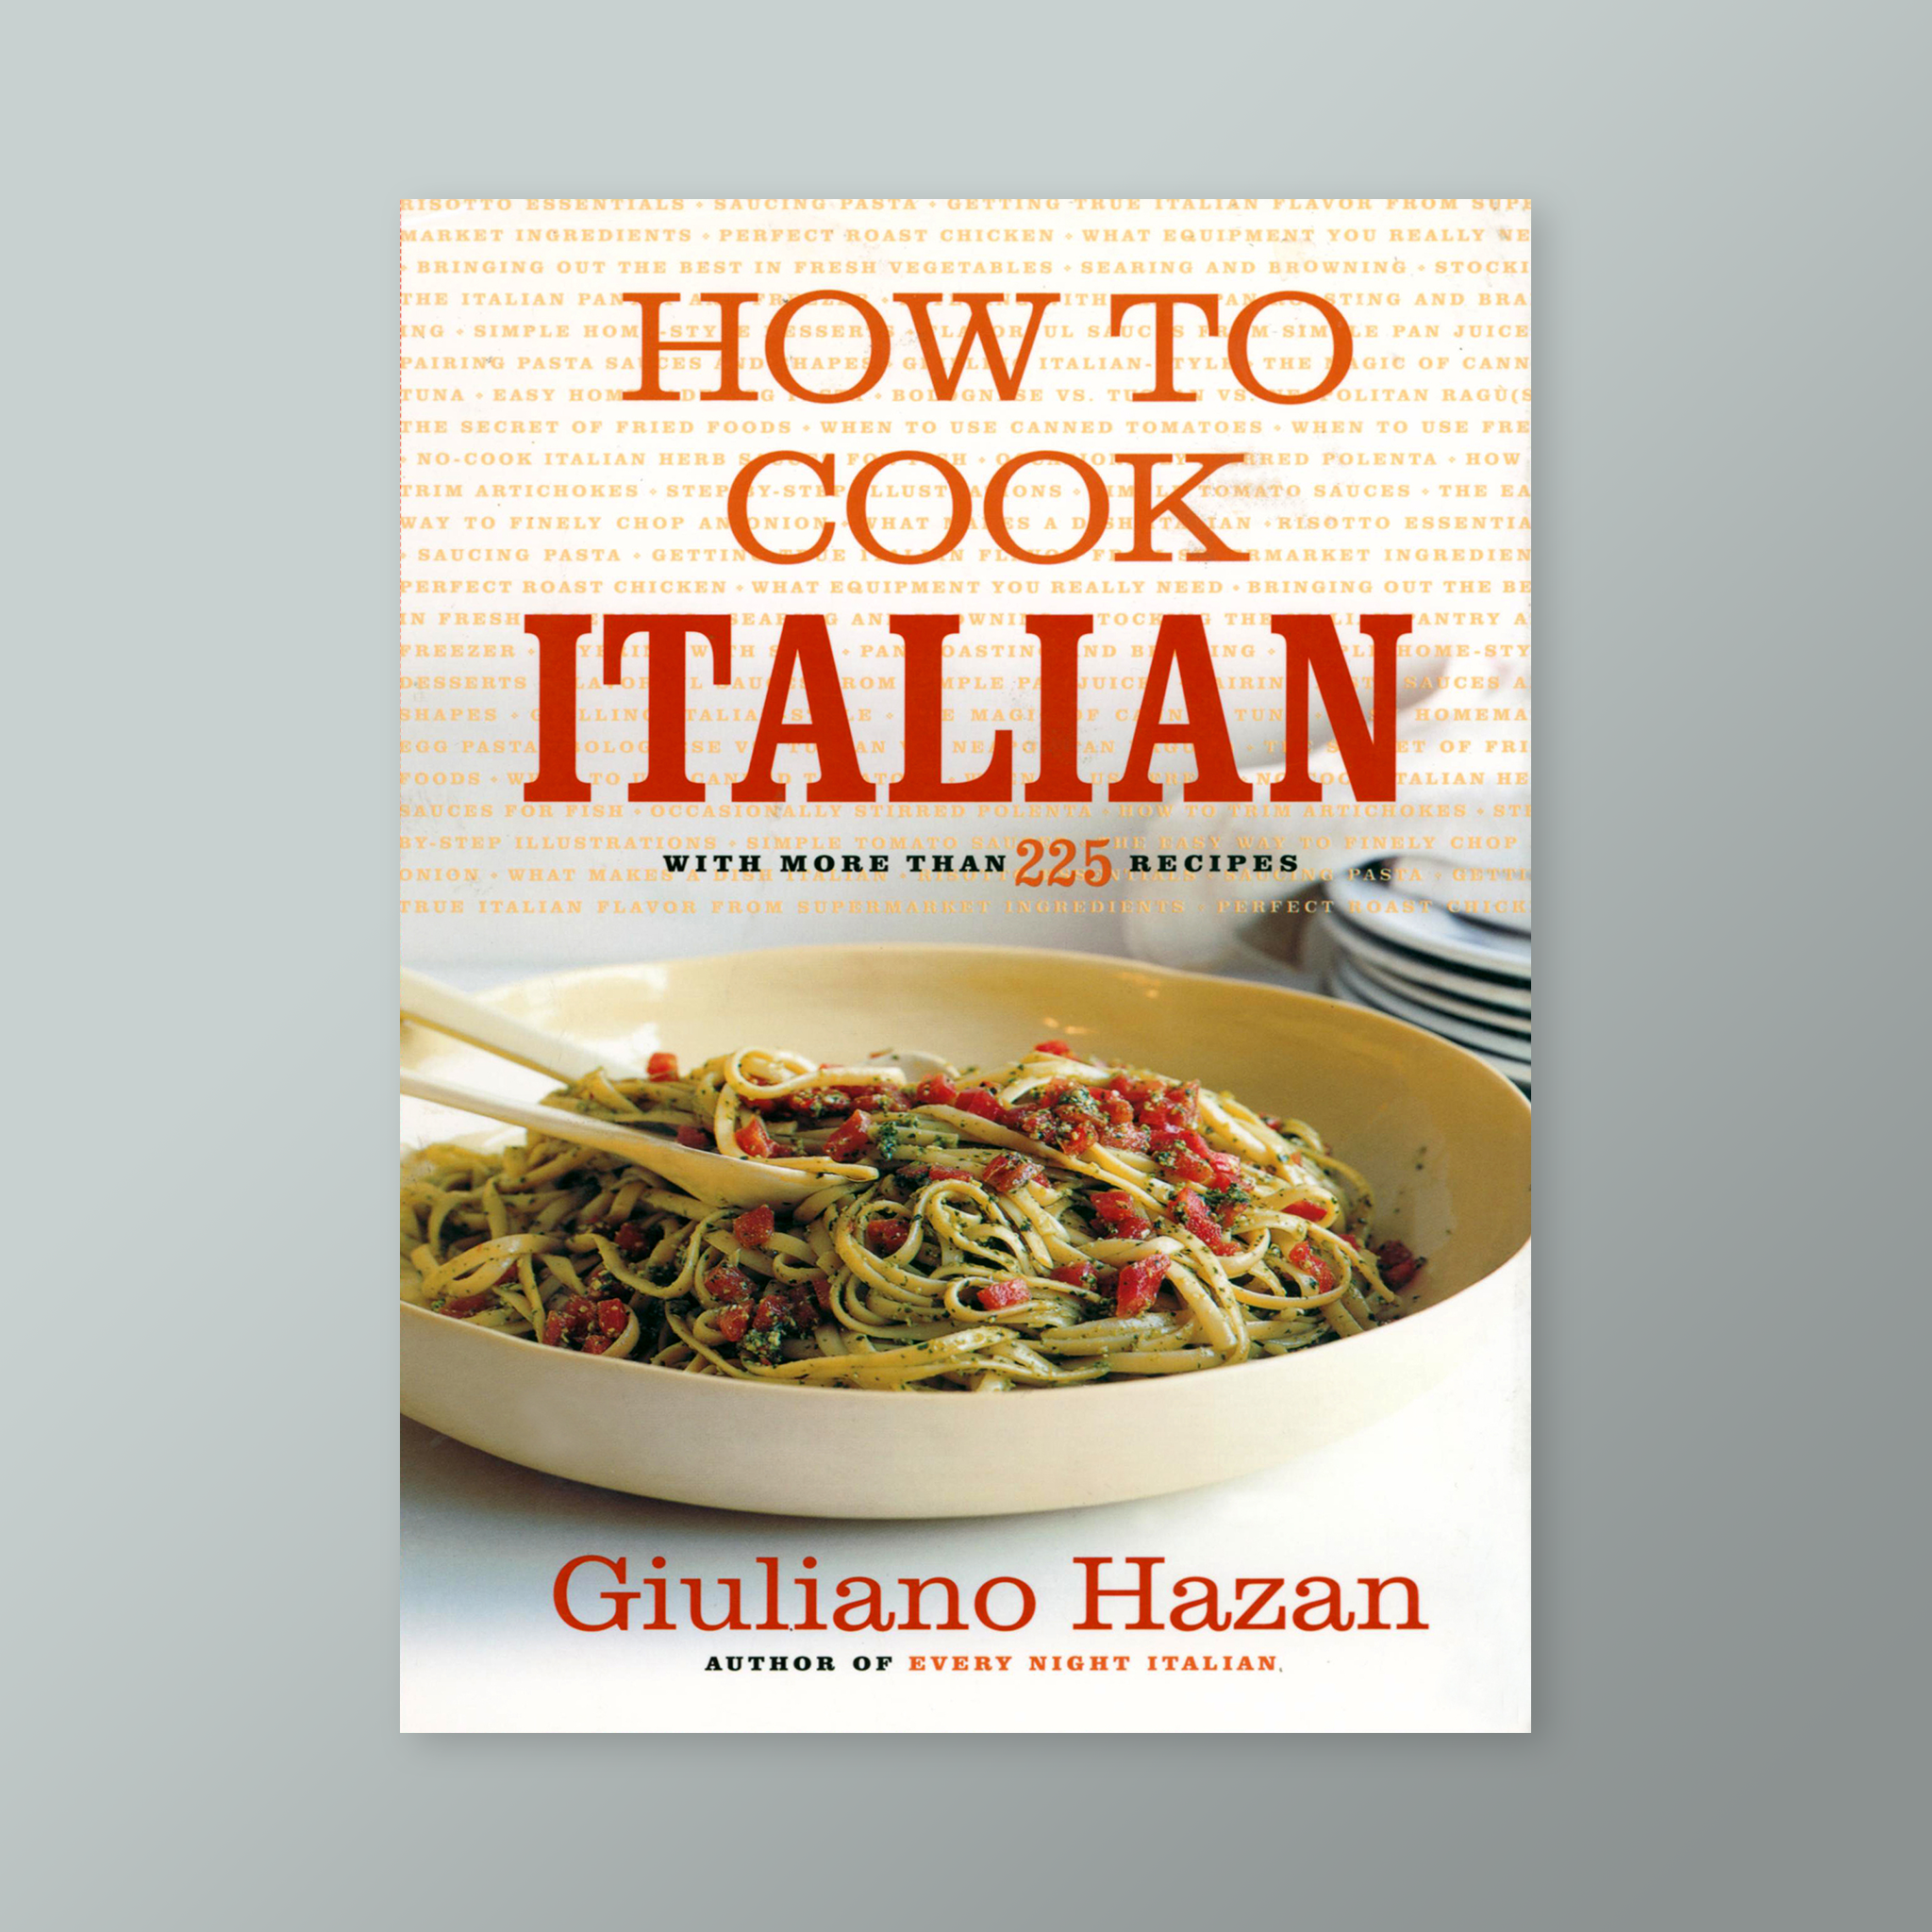 12. Marcella Hazan's Simple Butter and Tomato Sauce